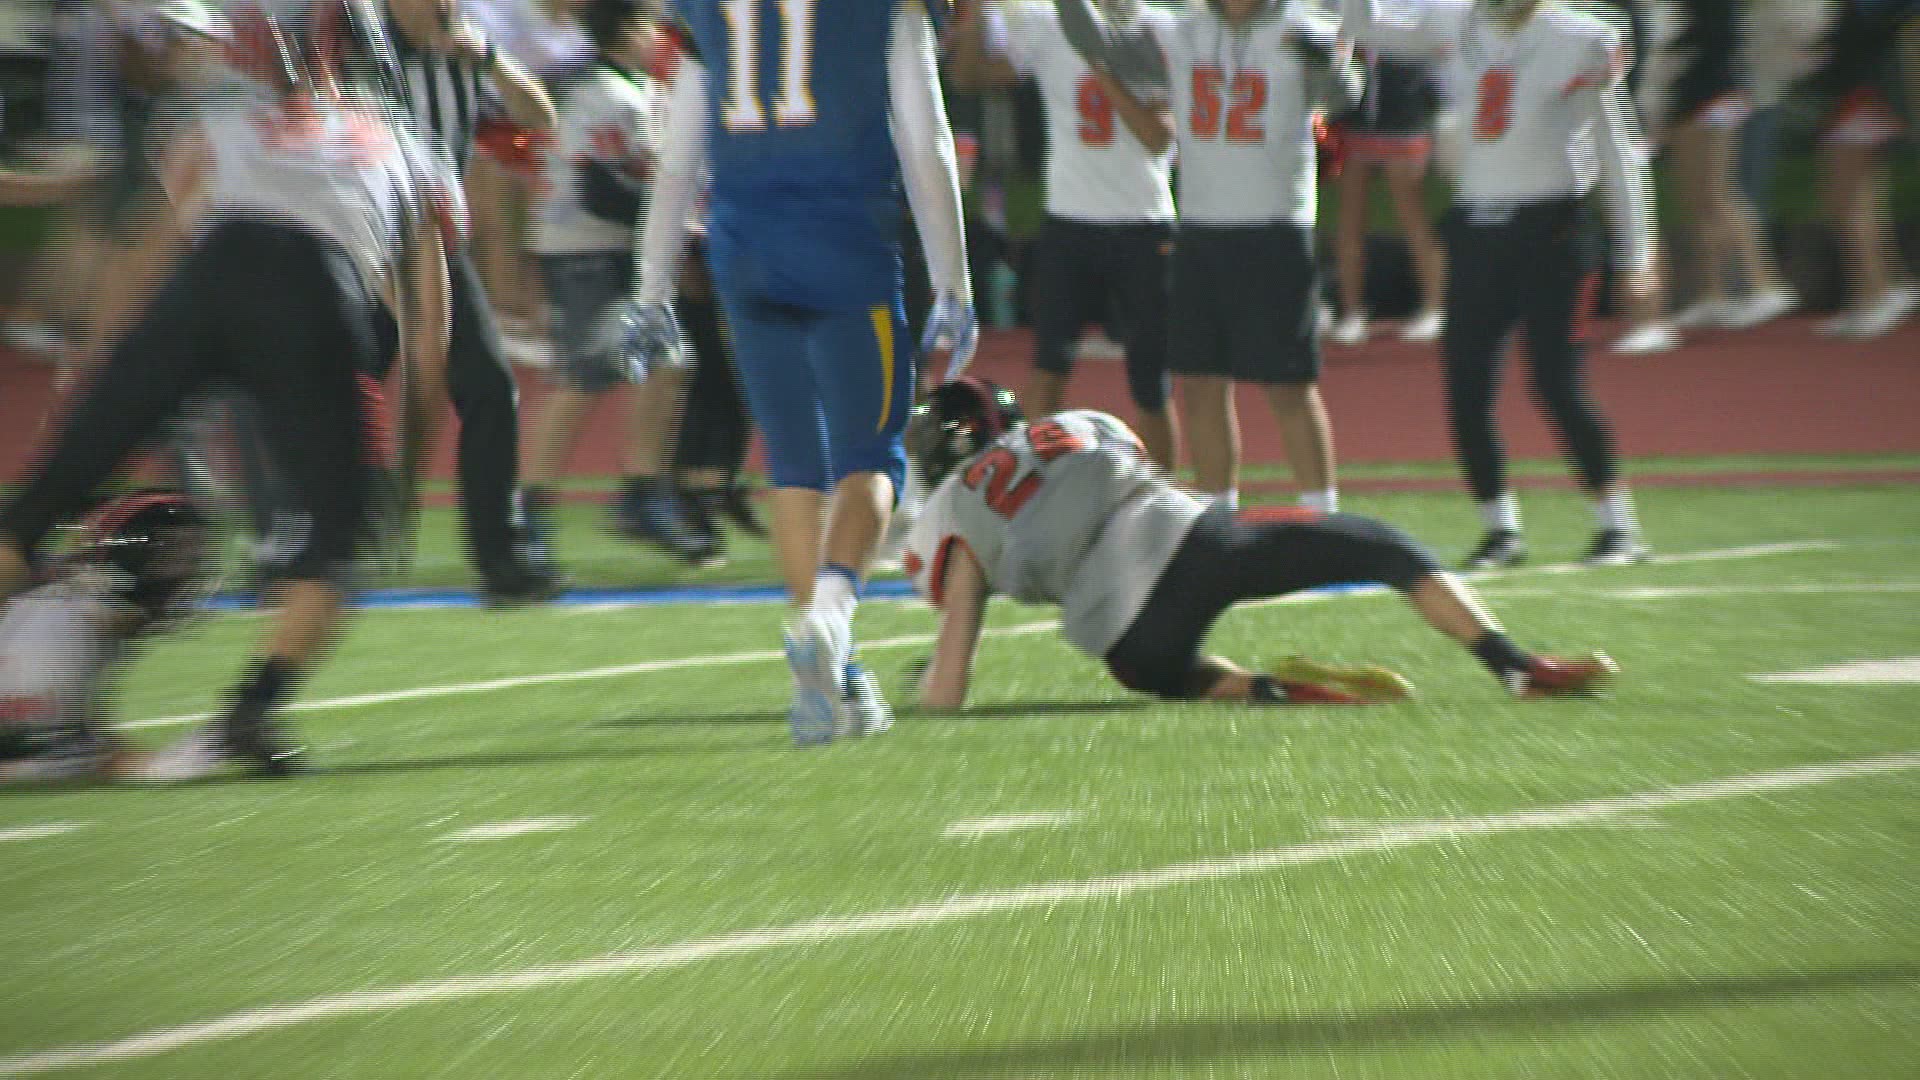 Highlights: No. 12 Barlow comes back to beat No. 21 Beaverton 28-24 in the first round of the 6A OSAA playoffs on Nov. 2, 2018.